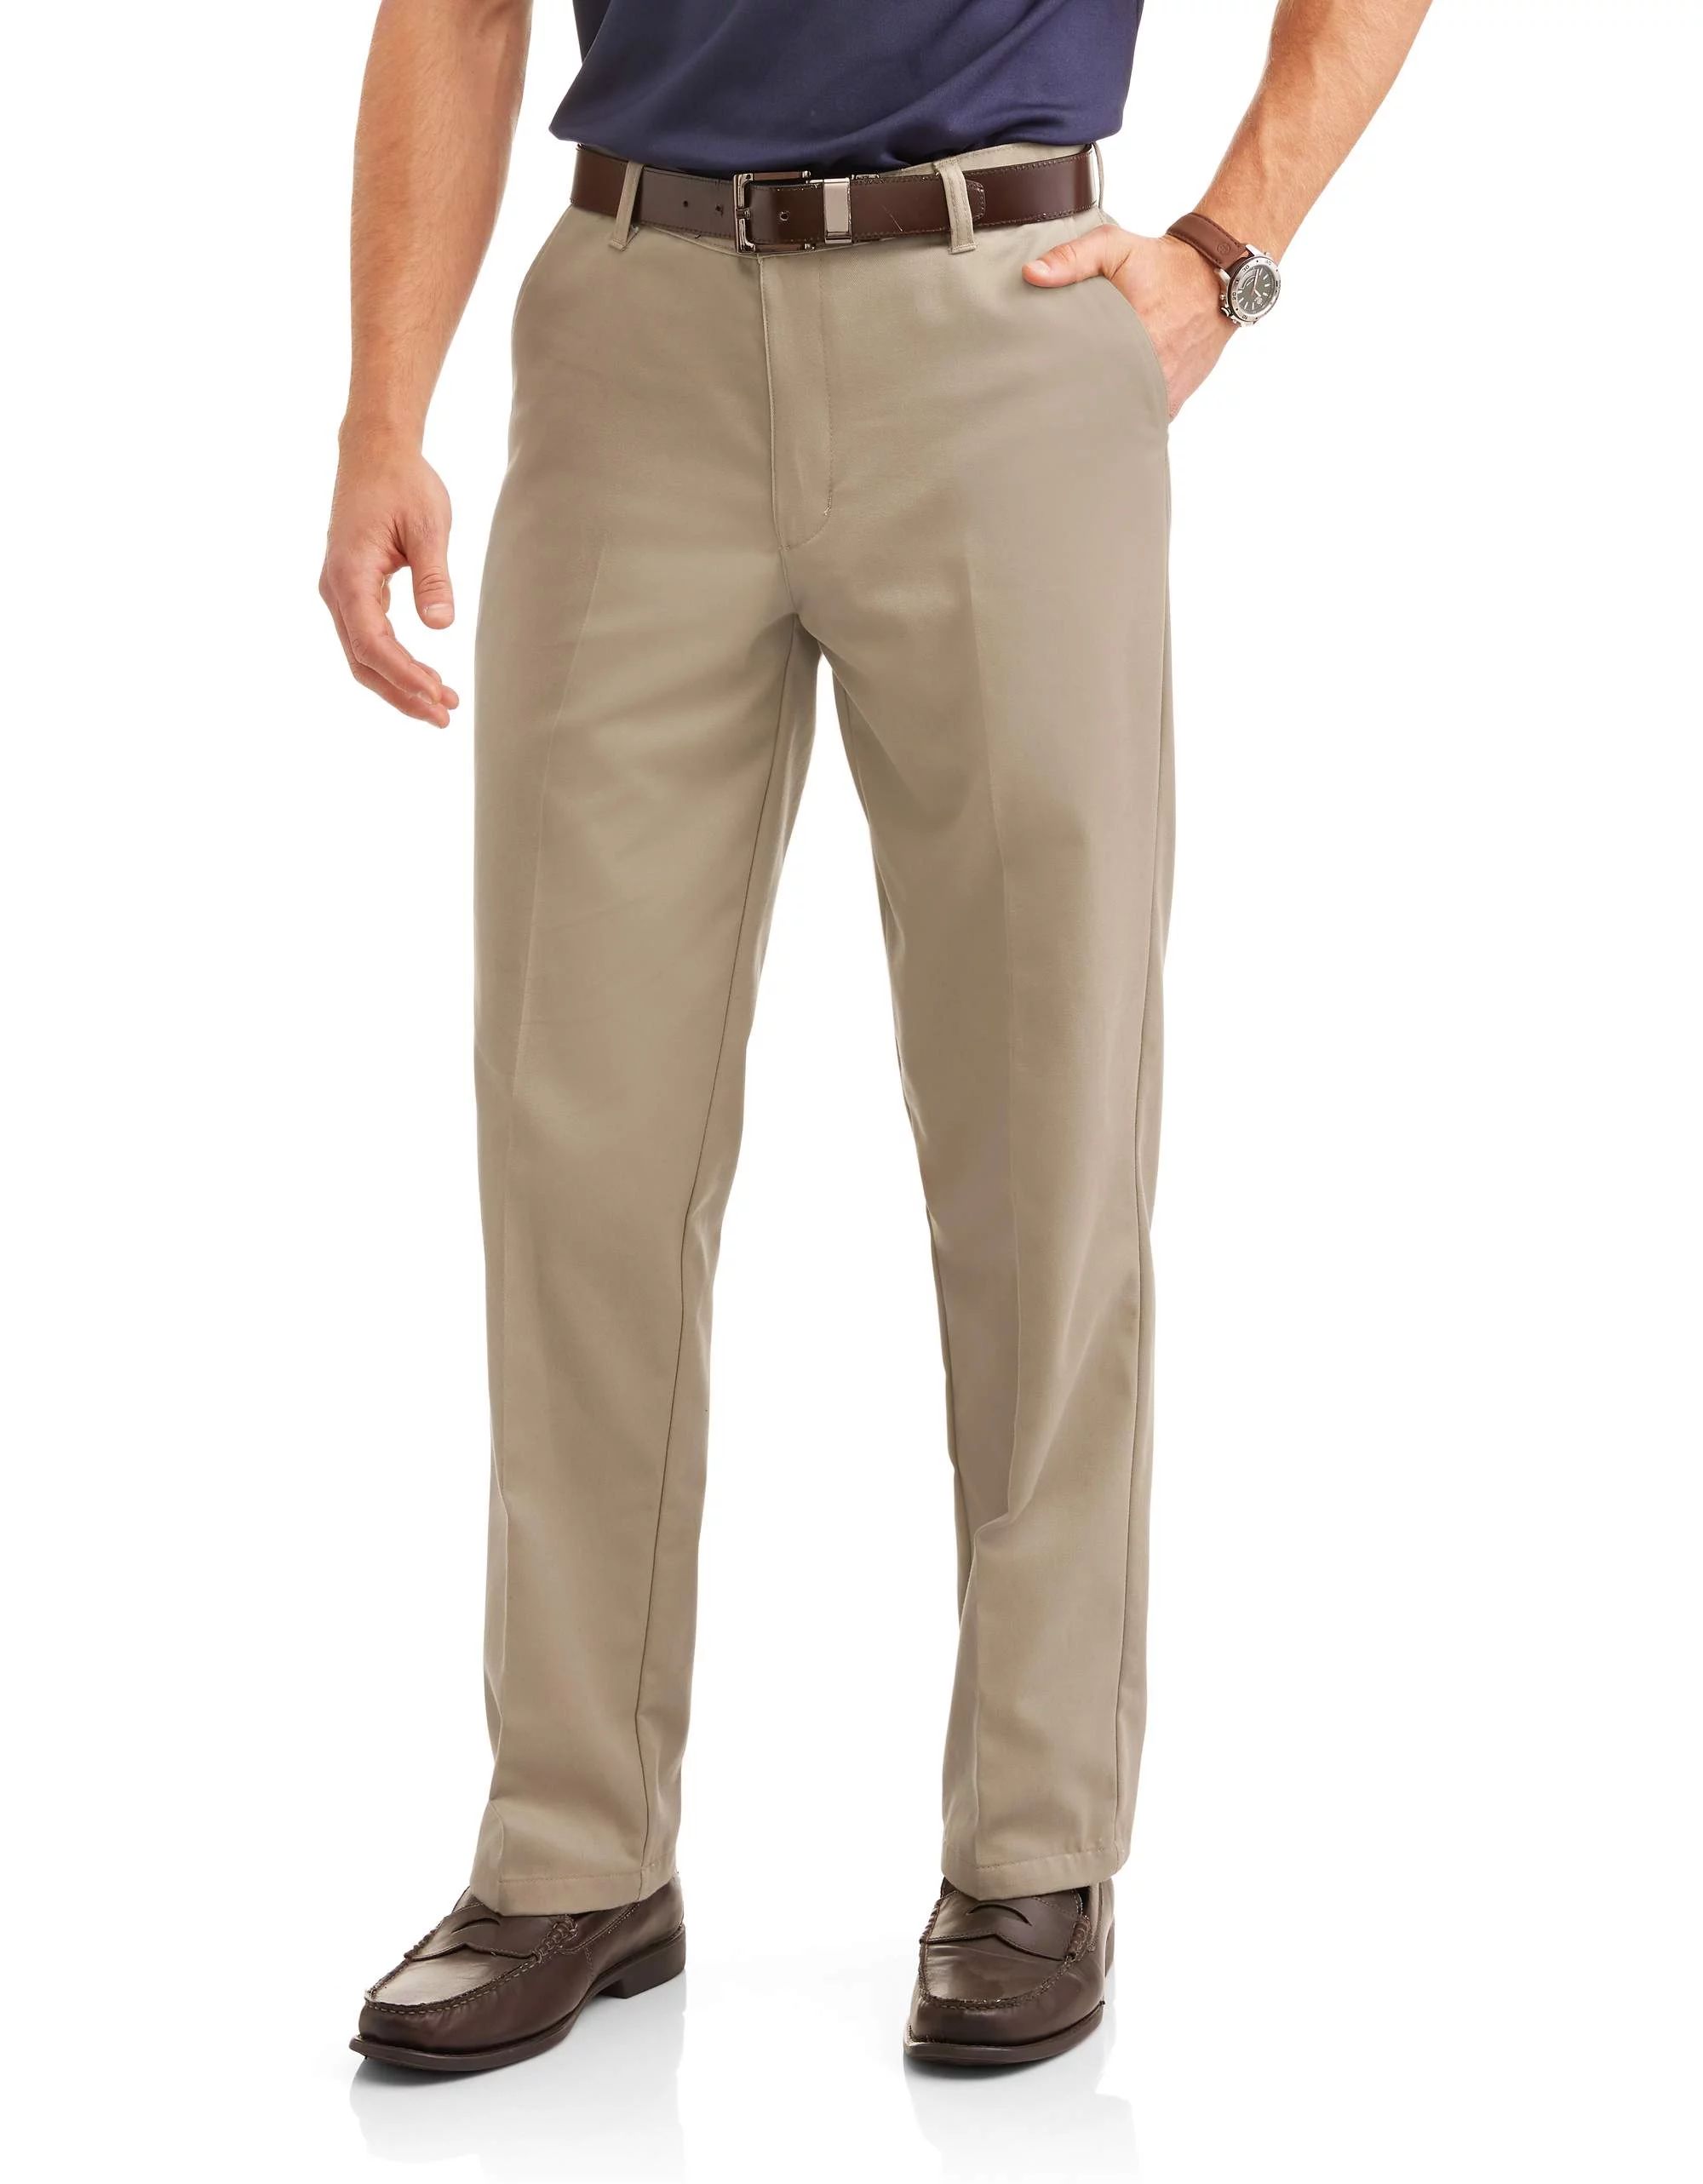 George Men's Wrinkle Resistant Flat Front 100% Cotton Twill Pant with Scotchgard | Walmart (US)